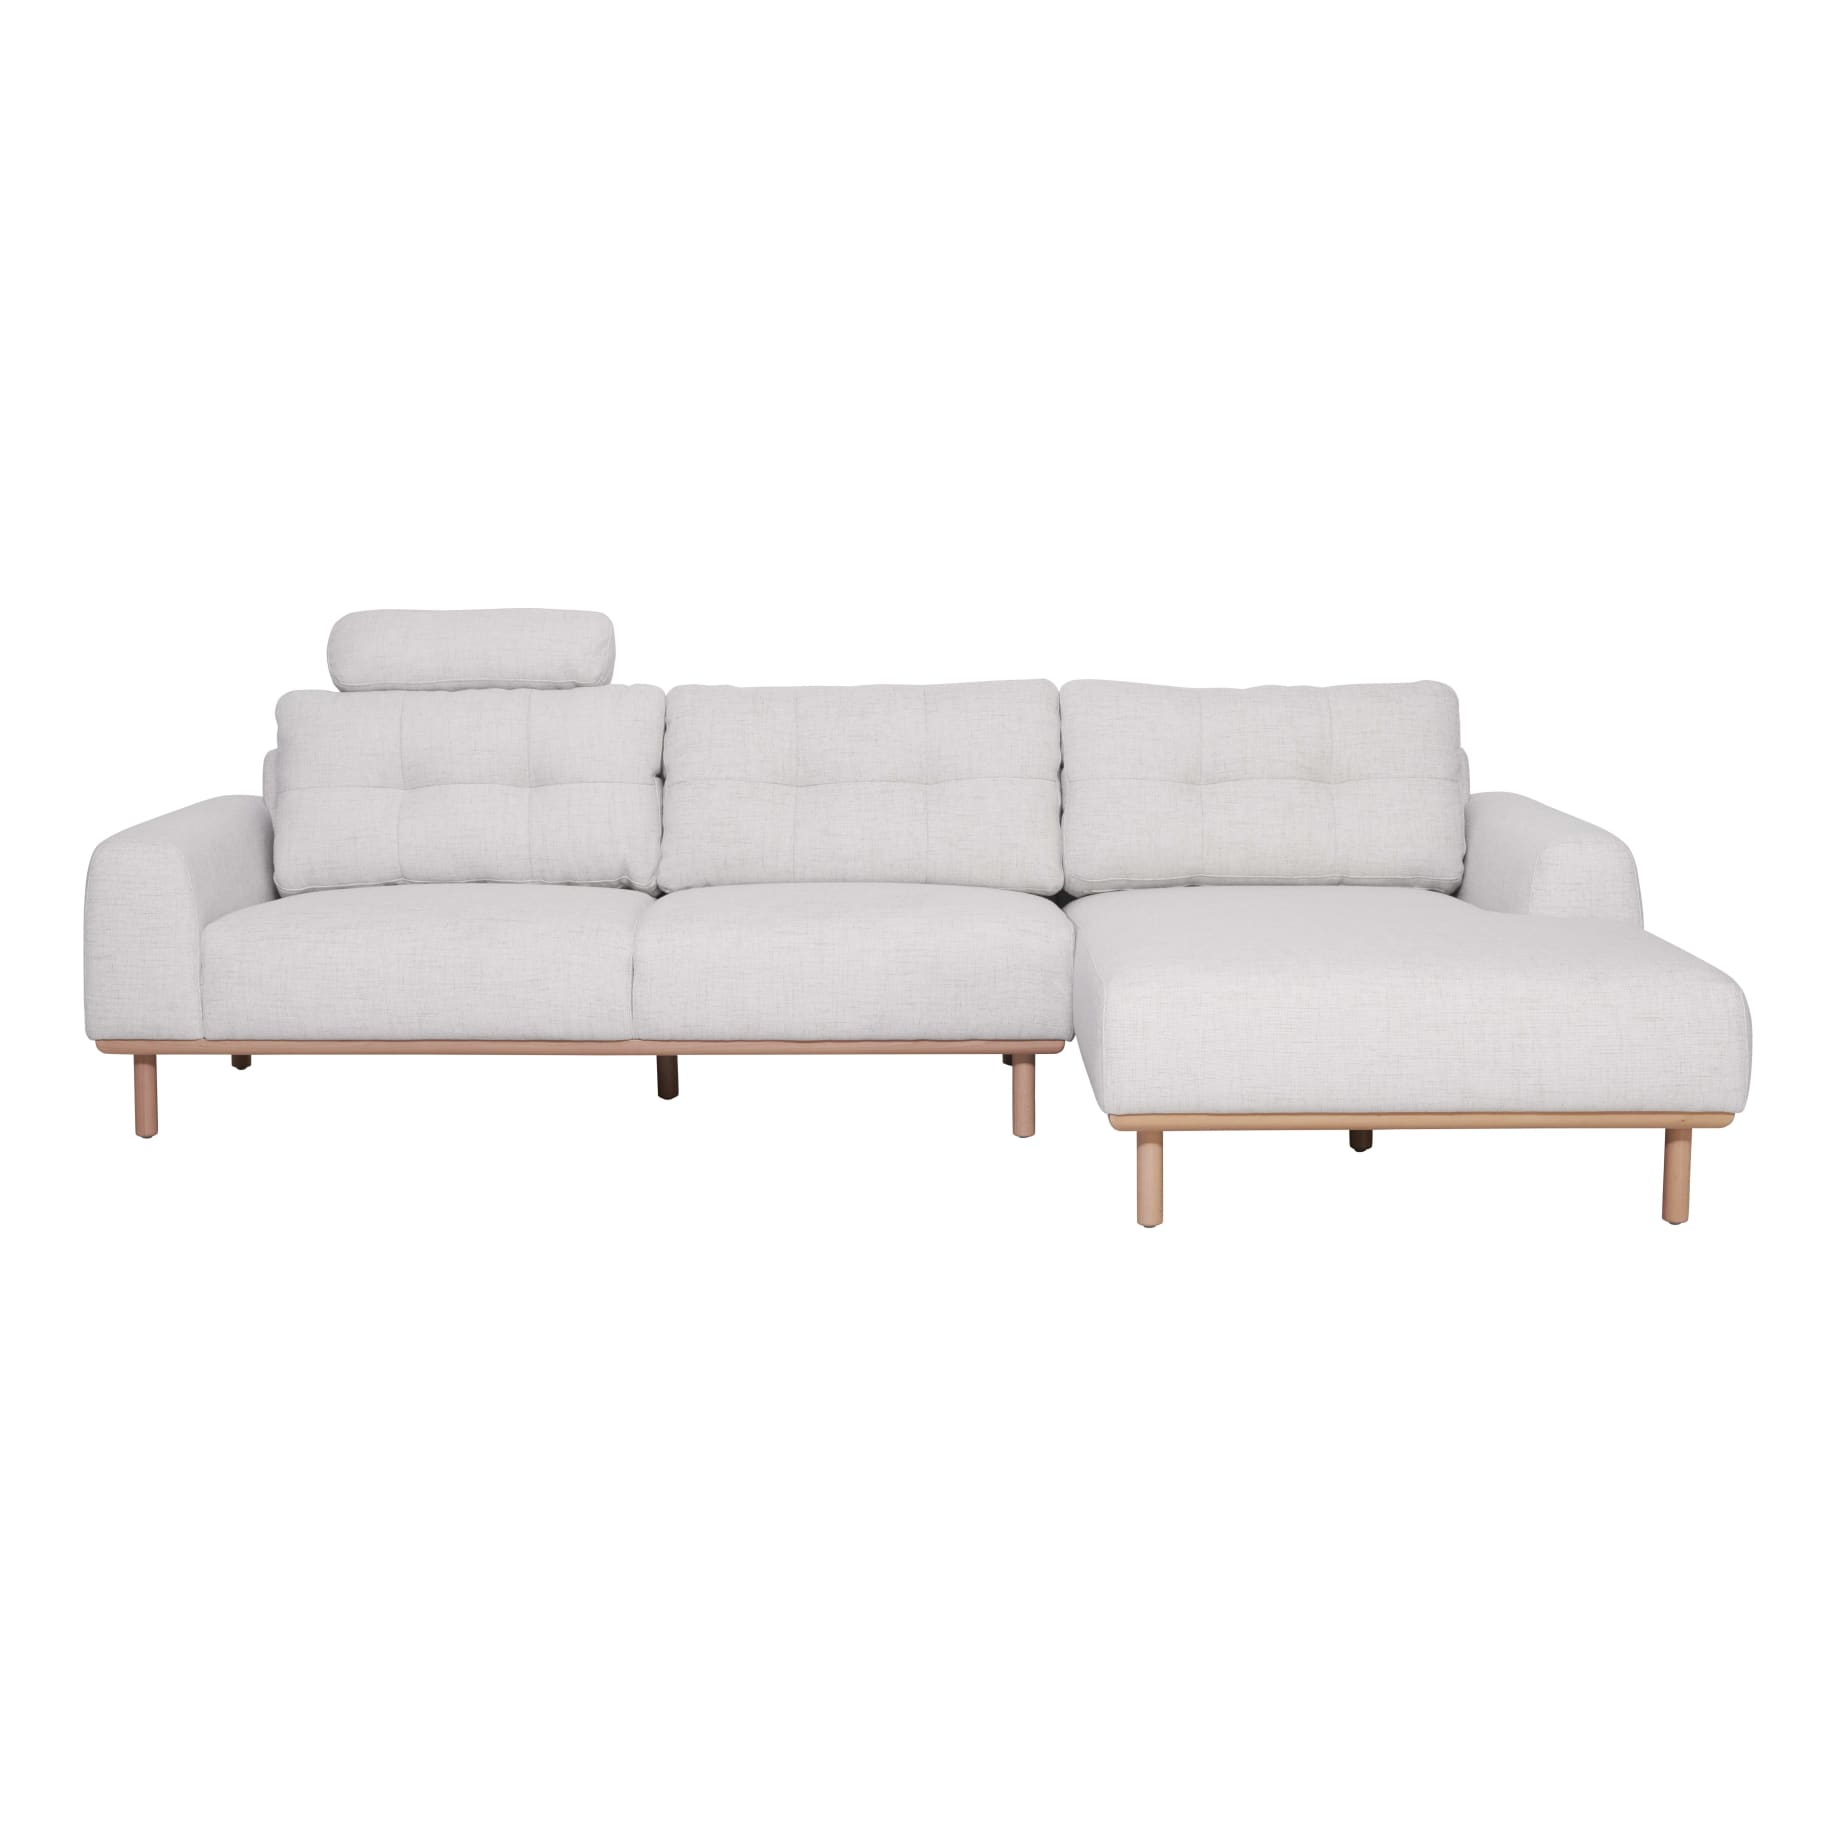 Stratton 3 Seater+Chaise RHF in Cloud White Sand